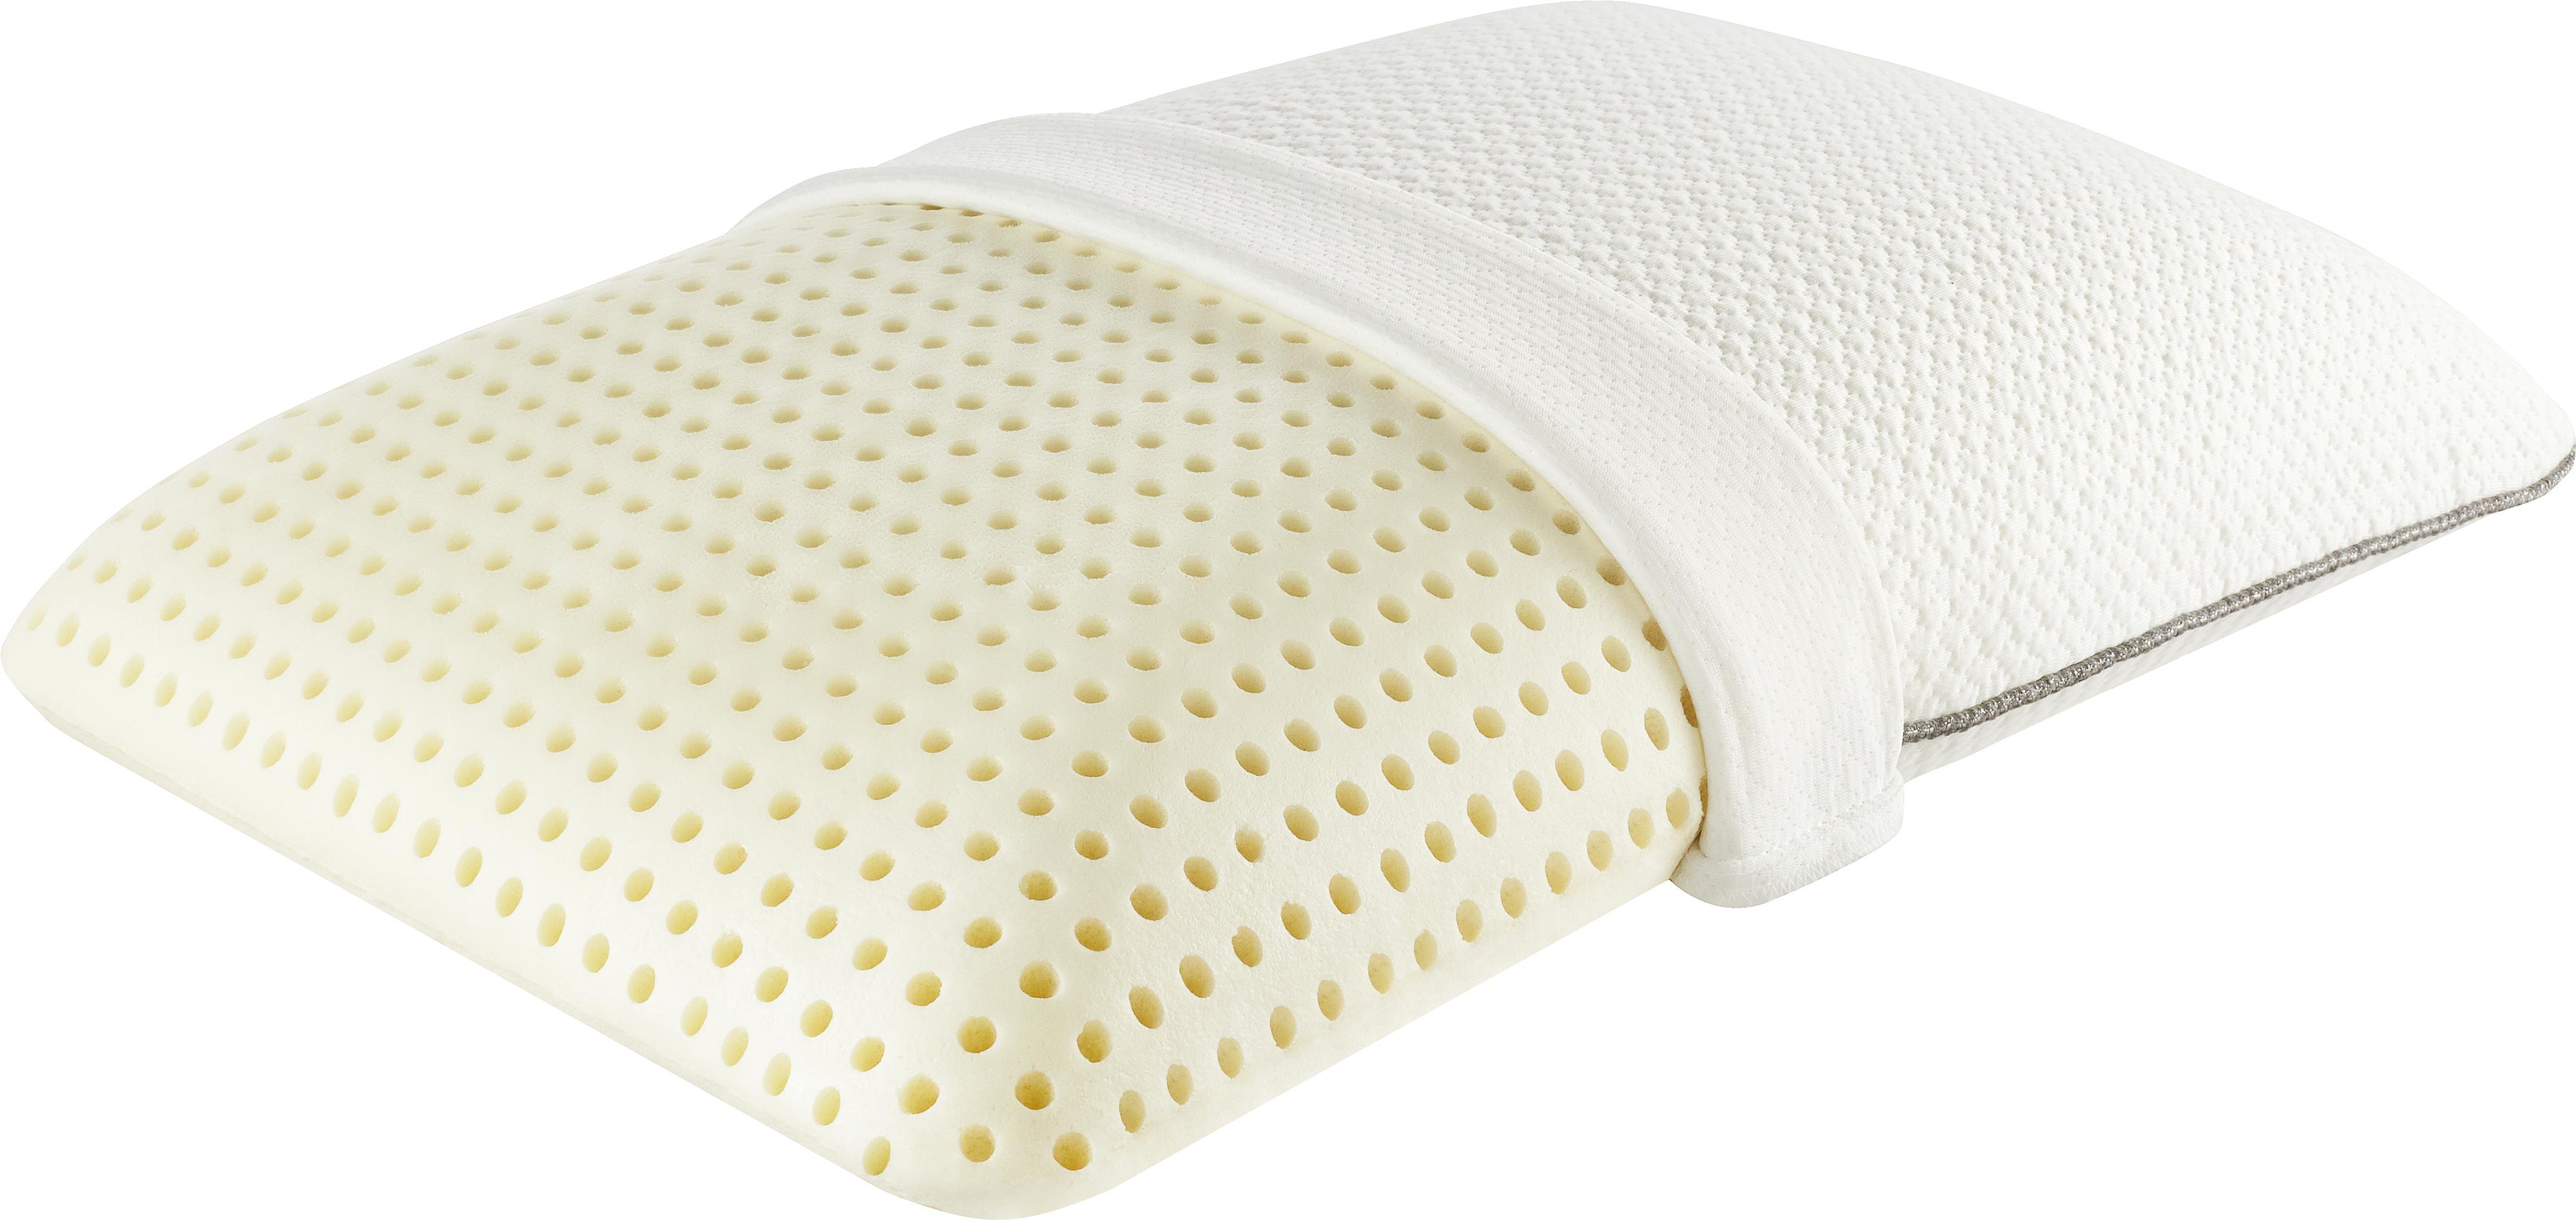 beautyrest pillows for side sleepers